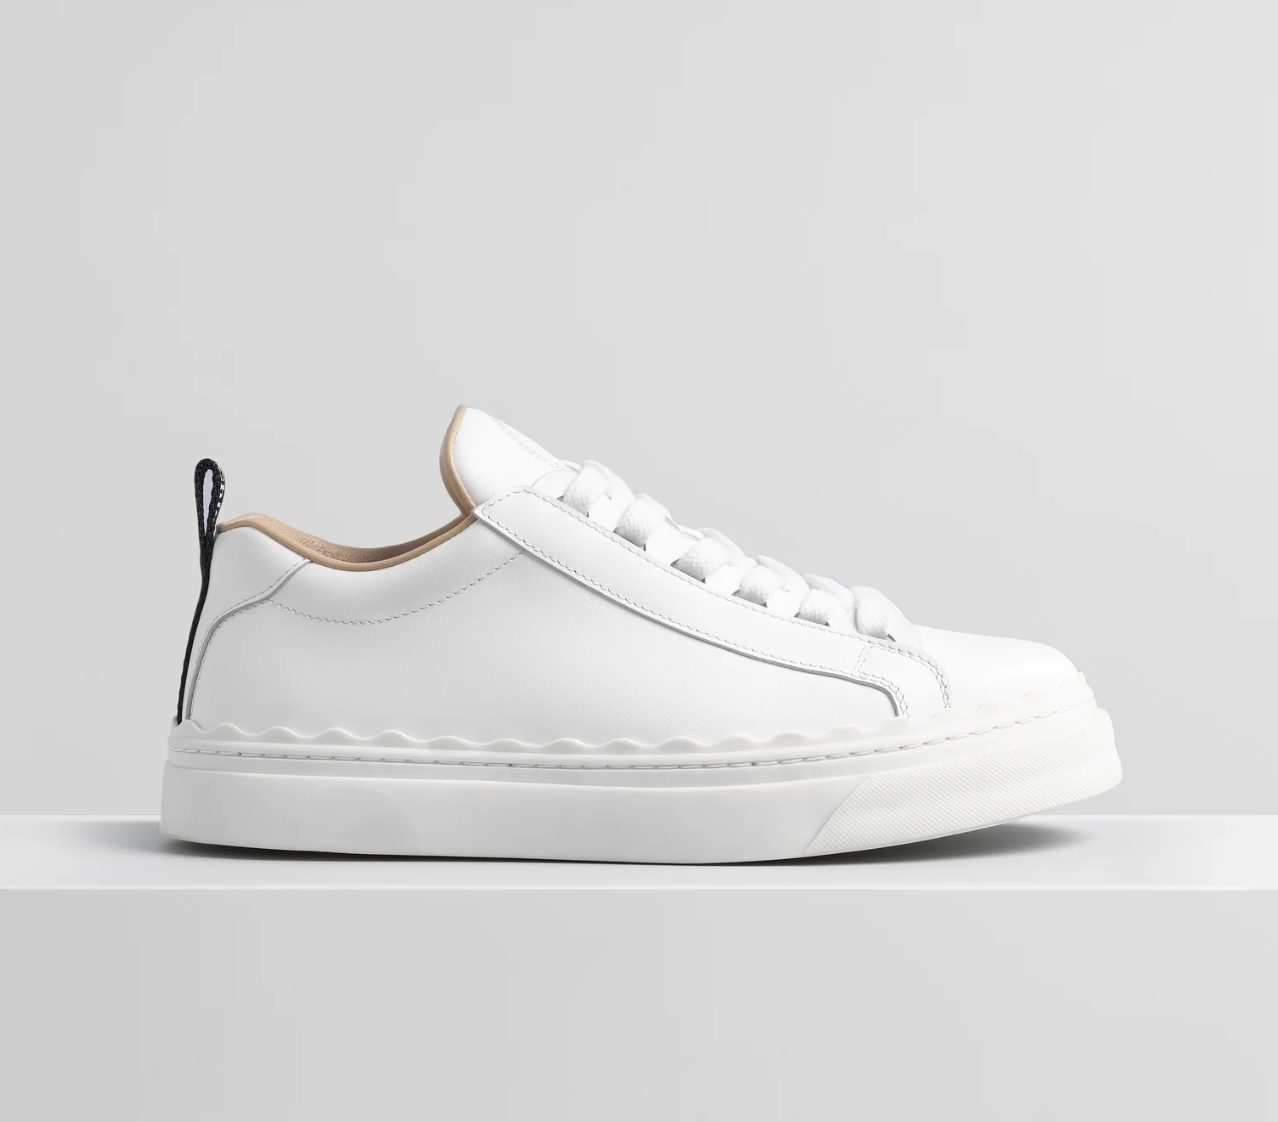 Stylish Trainers For Your 2020 Wardrobe